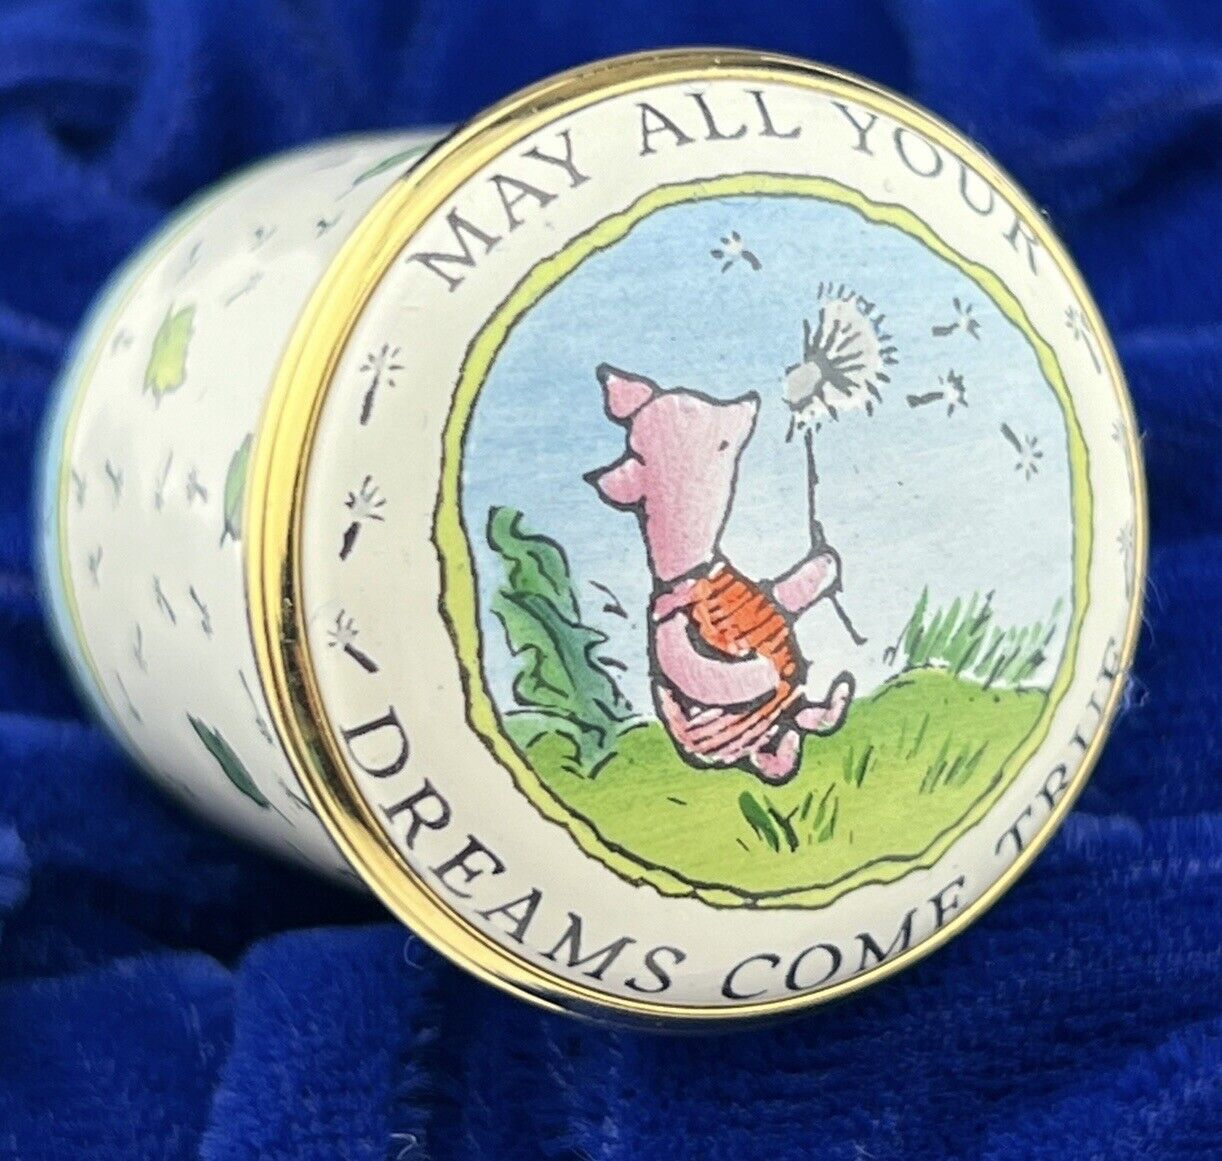 Rare Halcyon Days Enamels Piglet May All Your Dreams Come True Disney Pooh Boxed